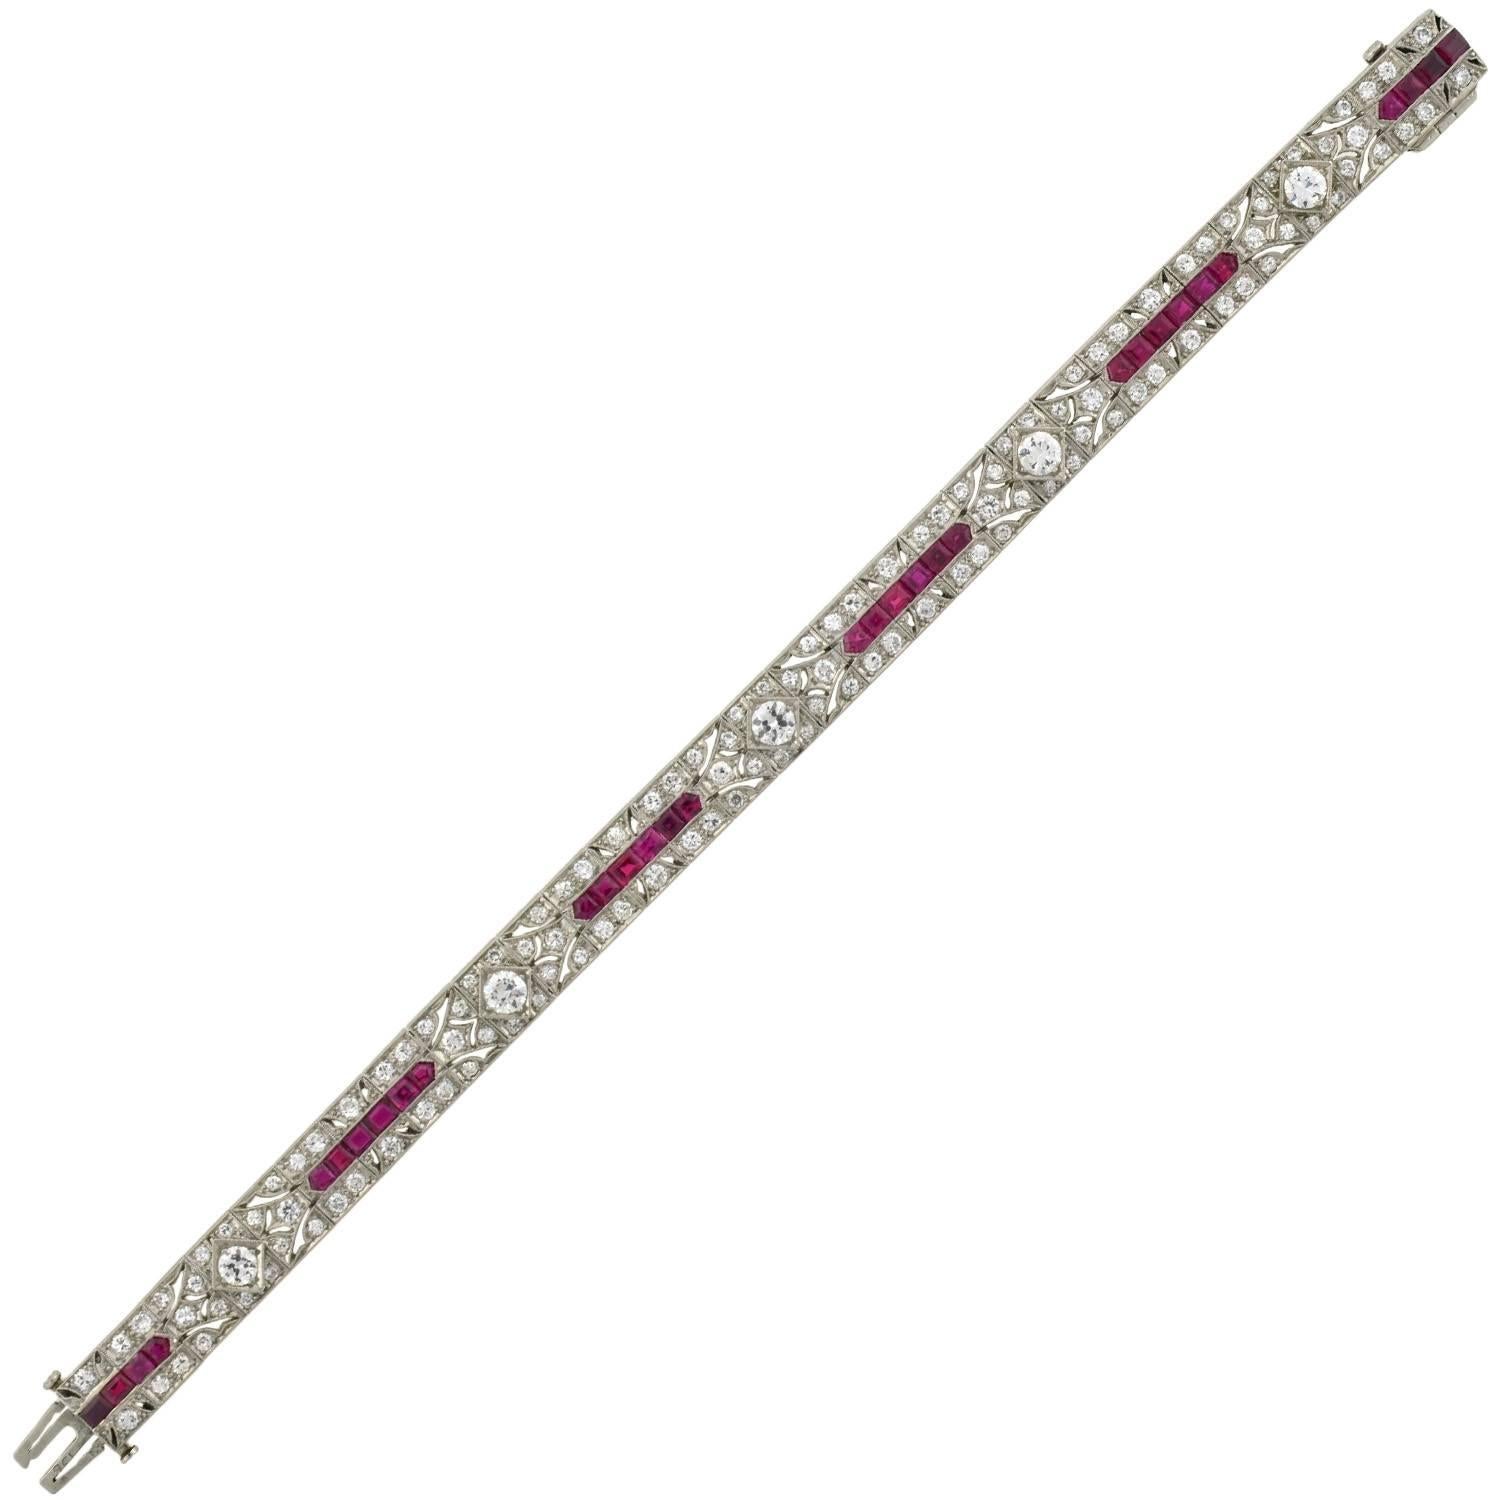 An absolutely stunning and rare diamond and ruby line bracelet from the Art Deco (ca1920-30s) era! Made of platinum, this gorgeous piece is comprised of 30 total links accented with old European Cut diamonds and luscious natural rubies, which wrap